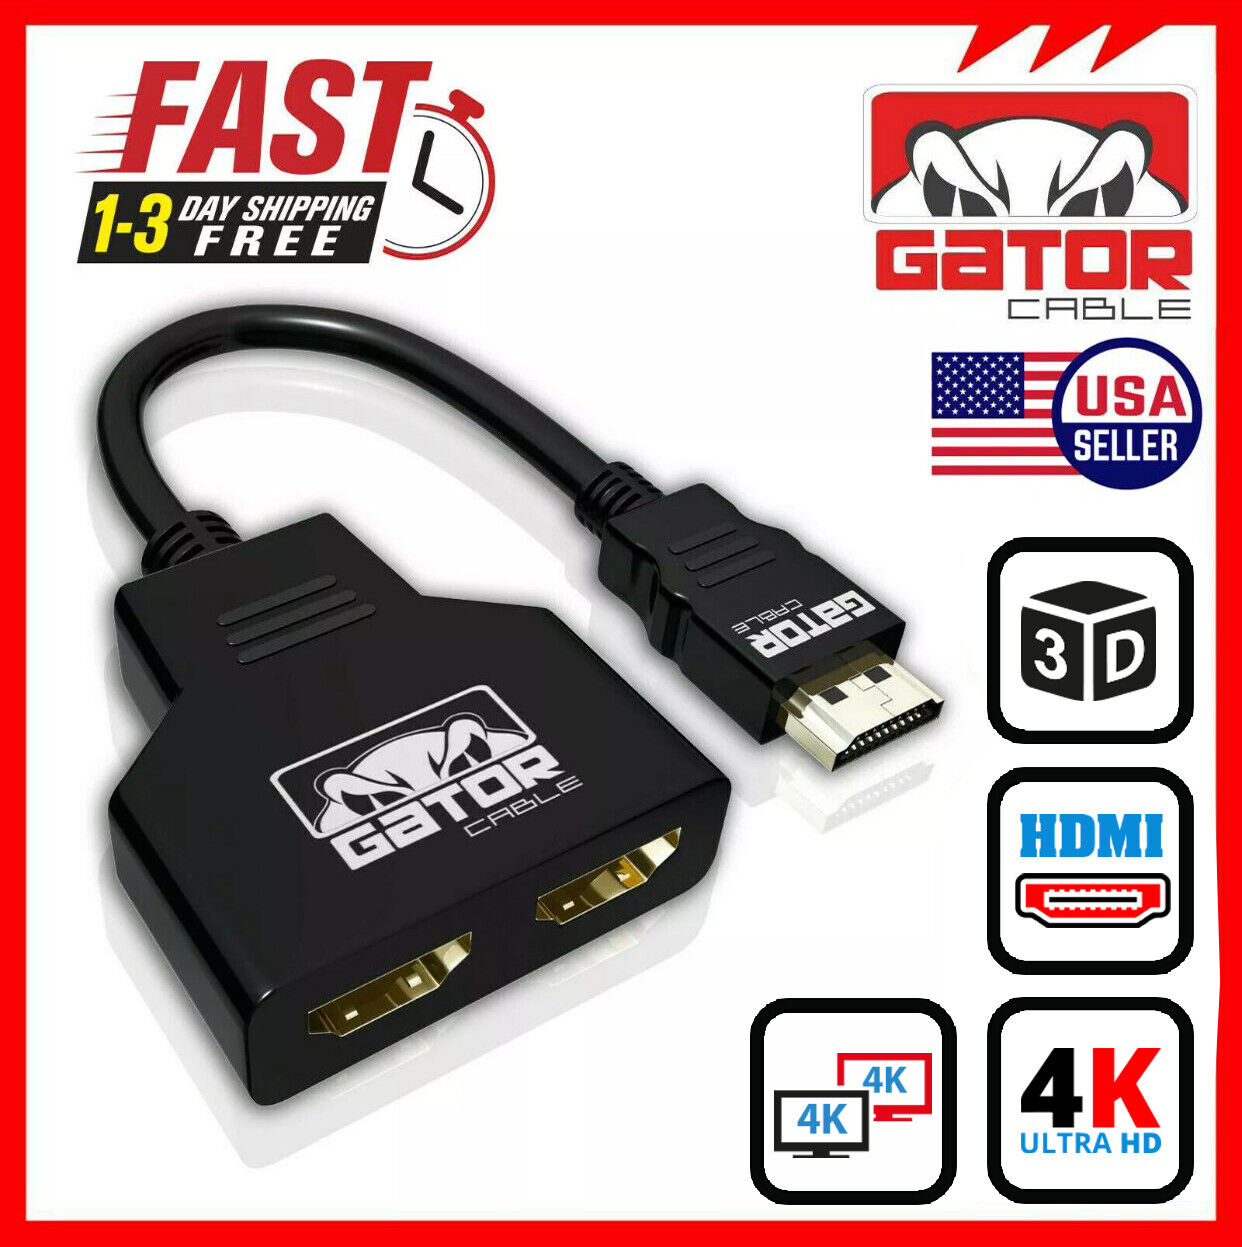 4K HDMI 2.0 Cable Splitter Switch Adapter Converter 1 In 2 Out UHD HDTV Switcher